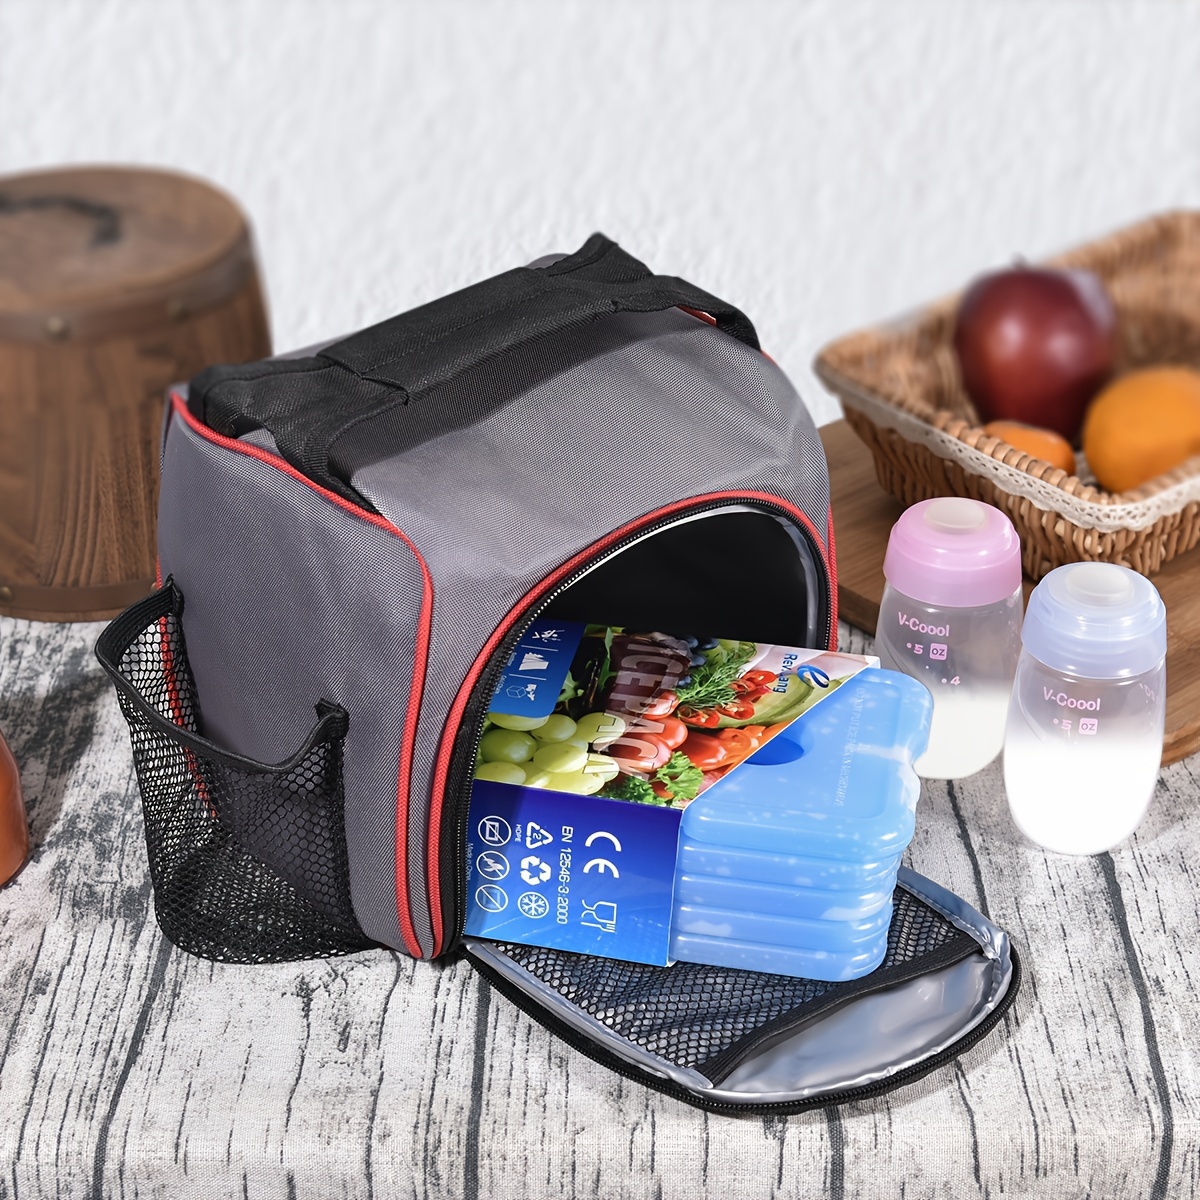 Cold Ice Pack Brick Reusable Long Lasting Cool Slim Thin Freezer Pack  Cooler for Lunch Boxes Bag